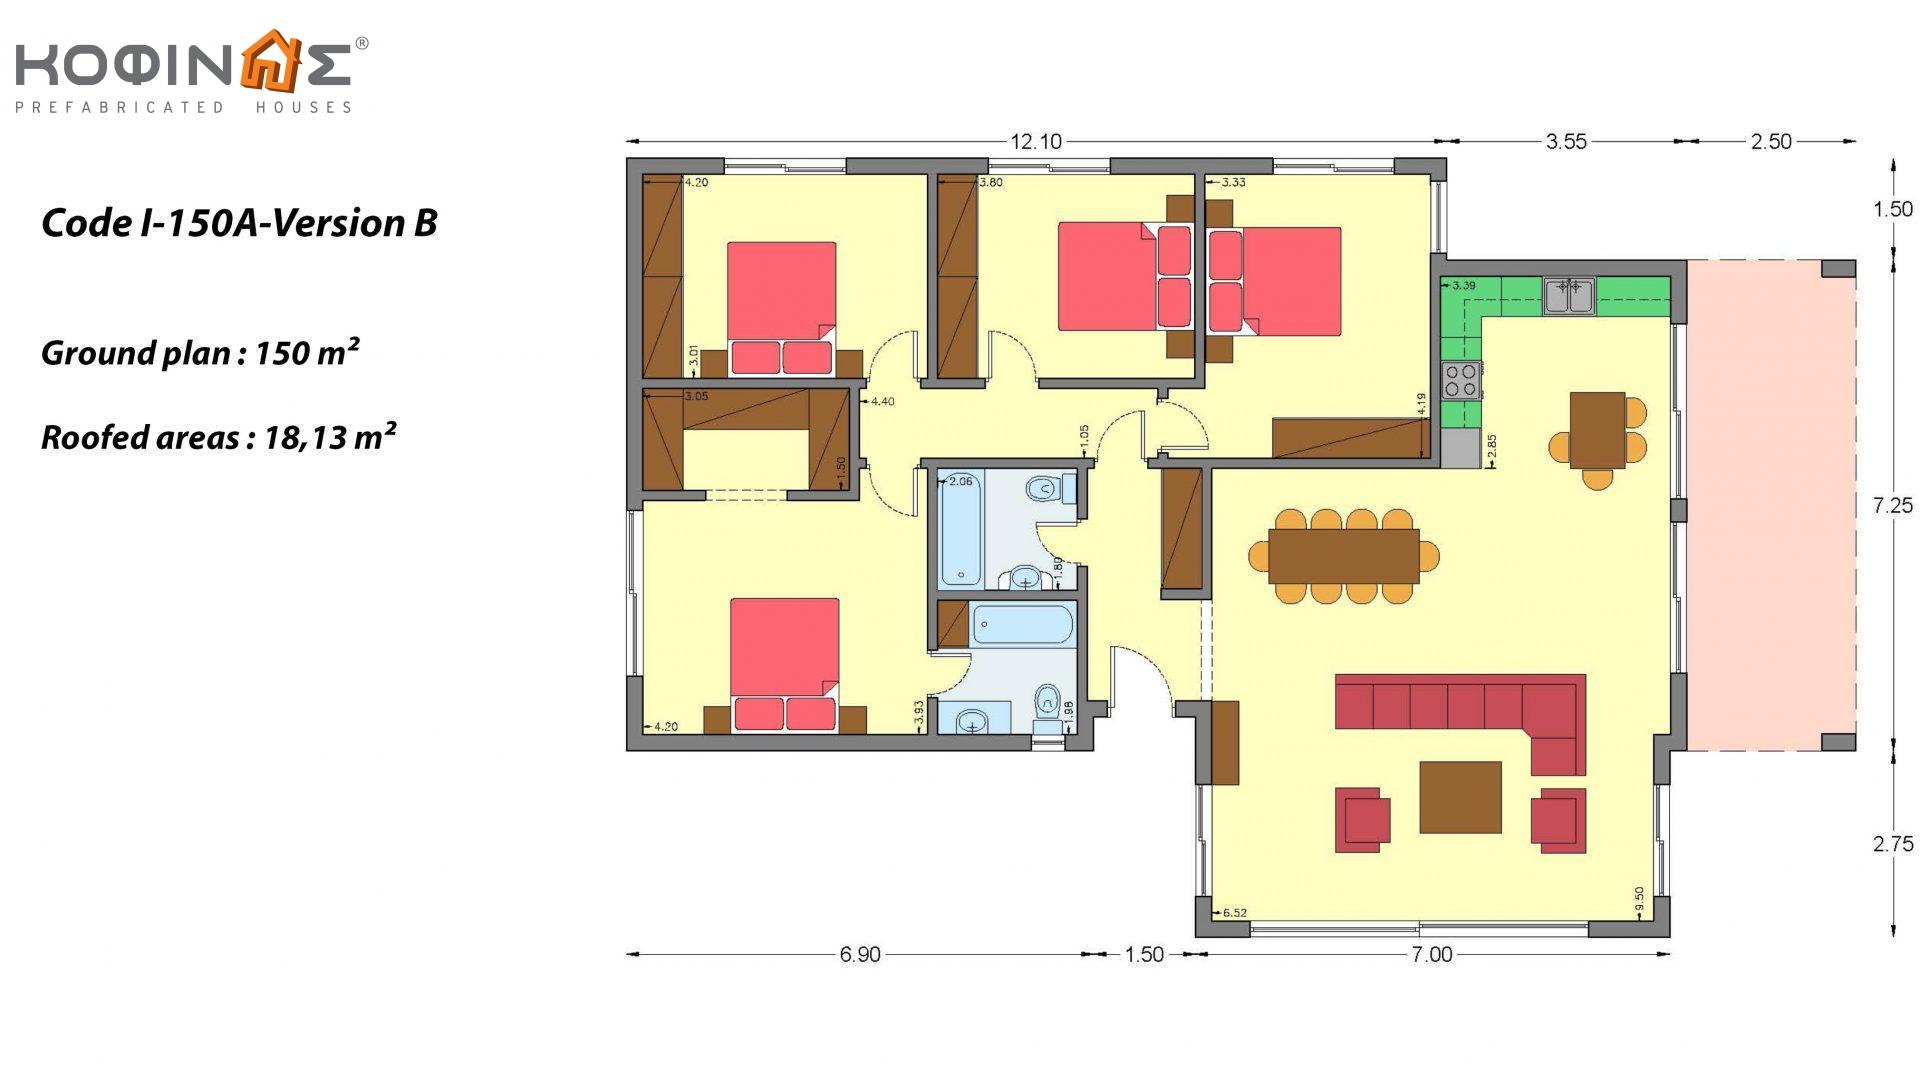 1-story house Ι-150Α, total surface of 150 m², covered roofed areas 18,13 m²